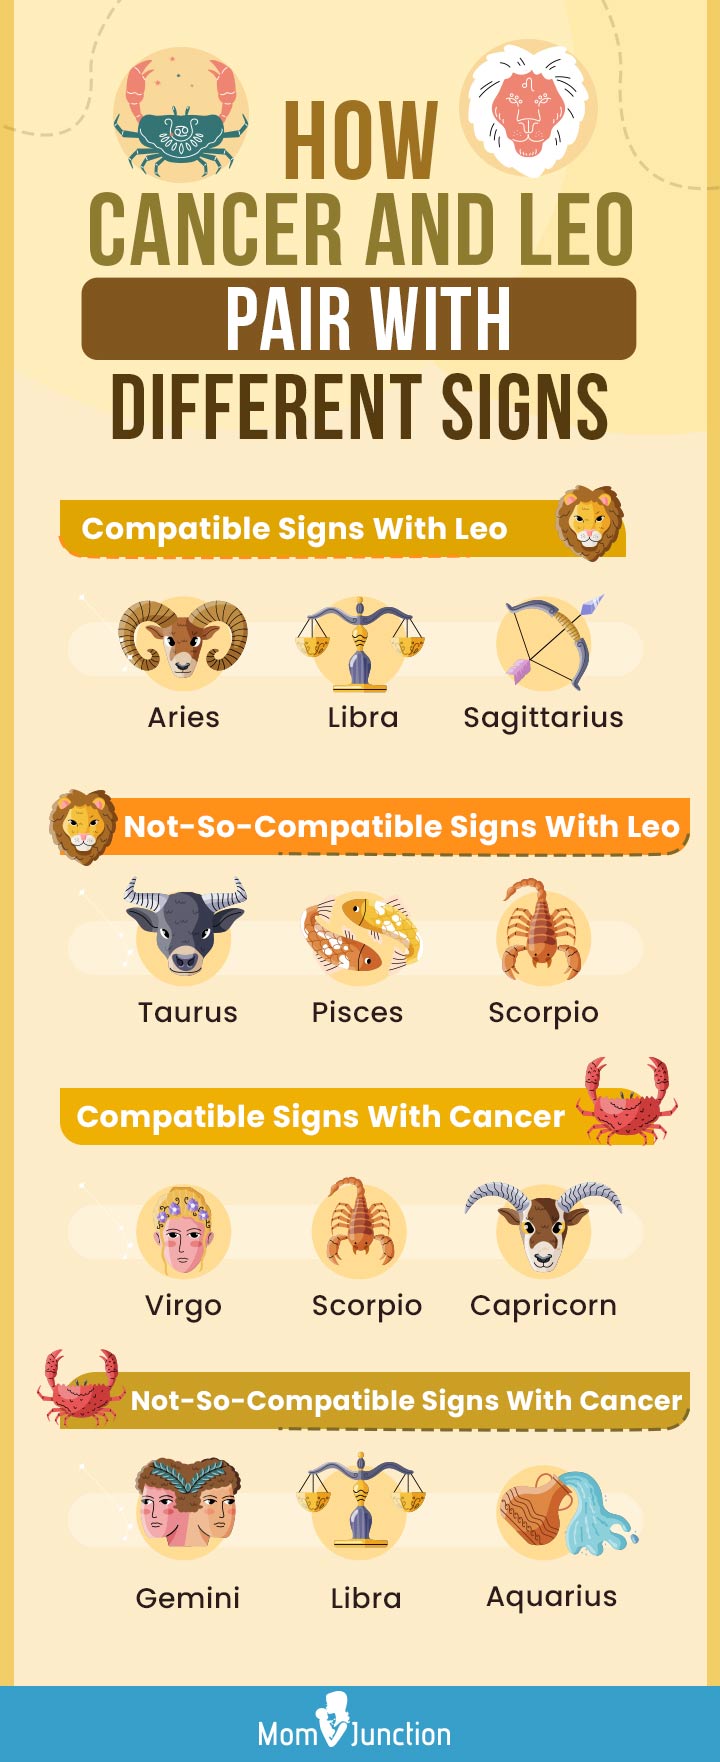 how cancer and leo pair with different signs [infographic]